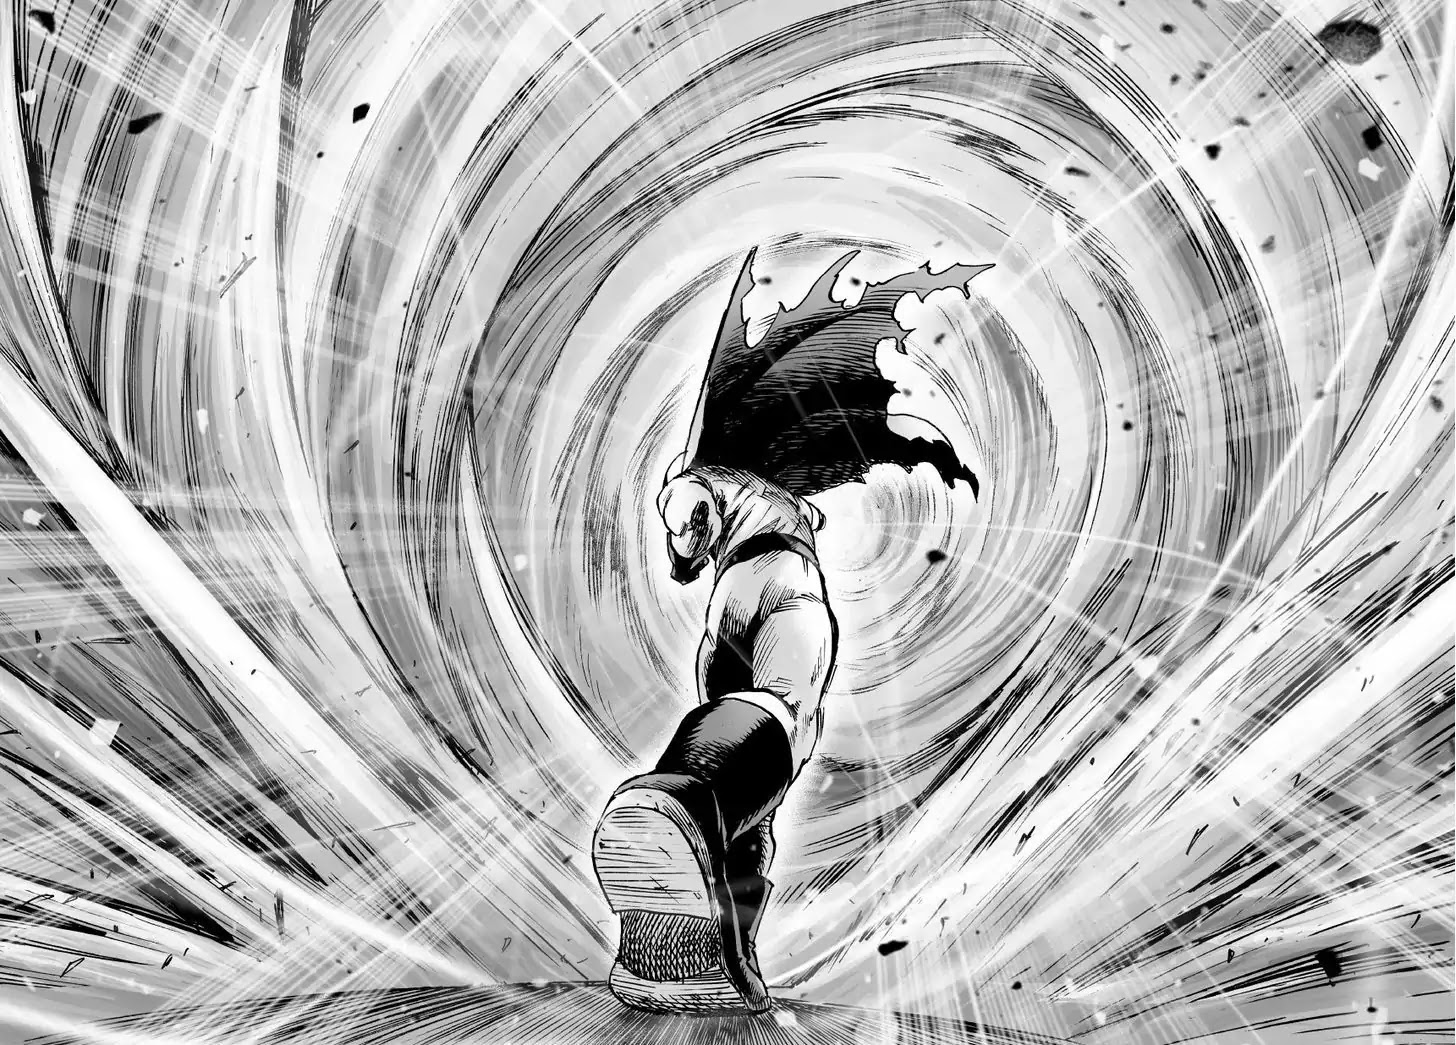 One Punch Man, Chapter 36 Boros S True Strength image 41